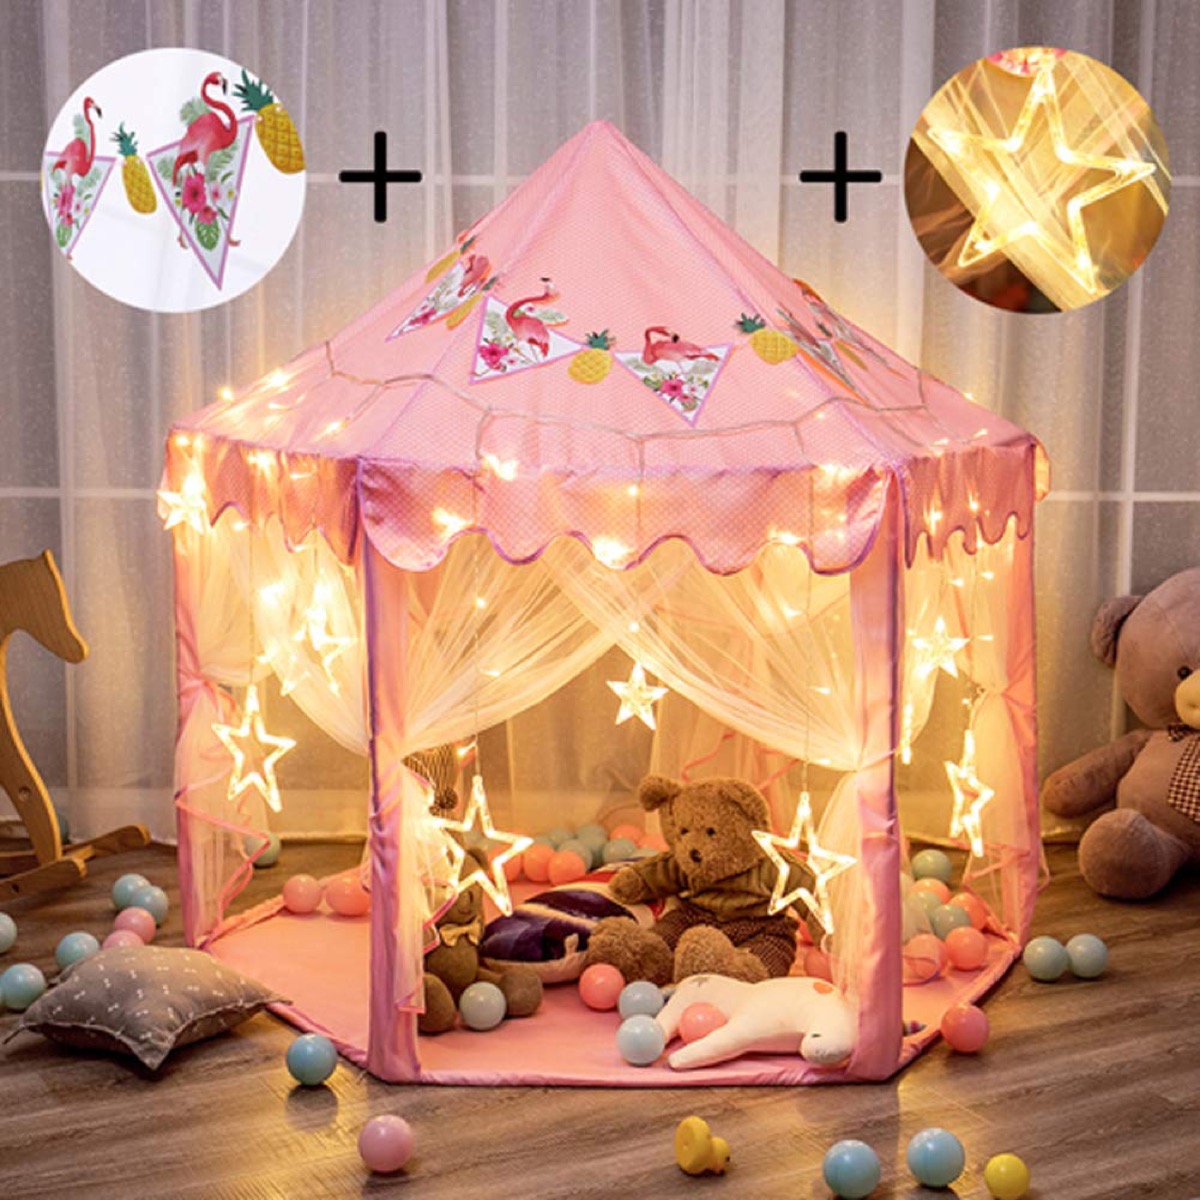 pink tent with twinkly lights, best outdoor toys for toddlers